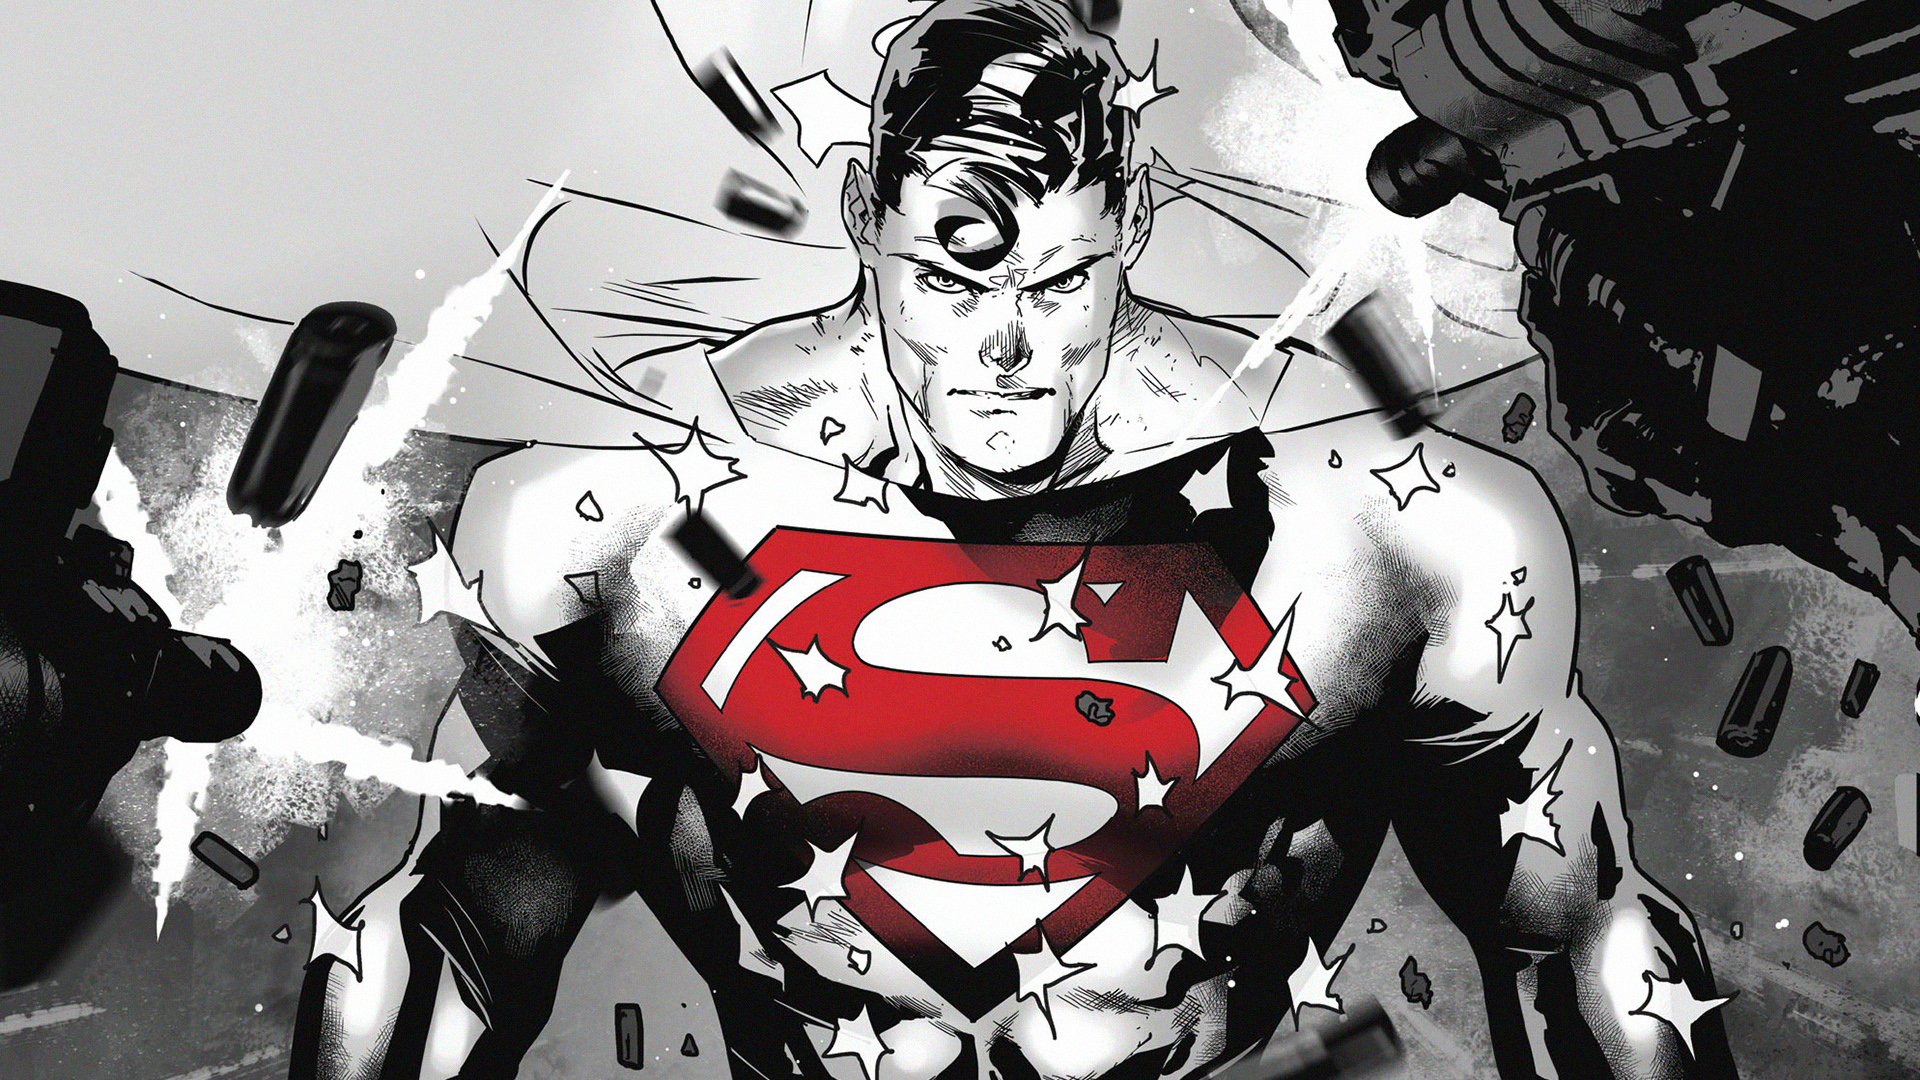 superman wallpaper for android, high resolution superman wallpaper